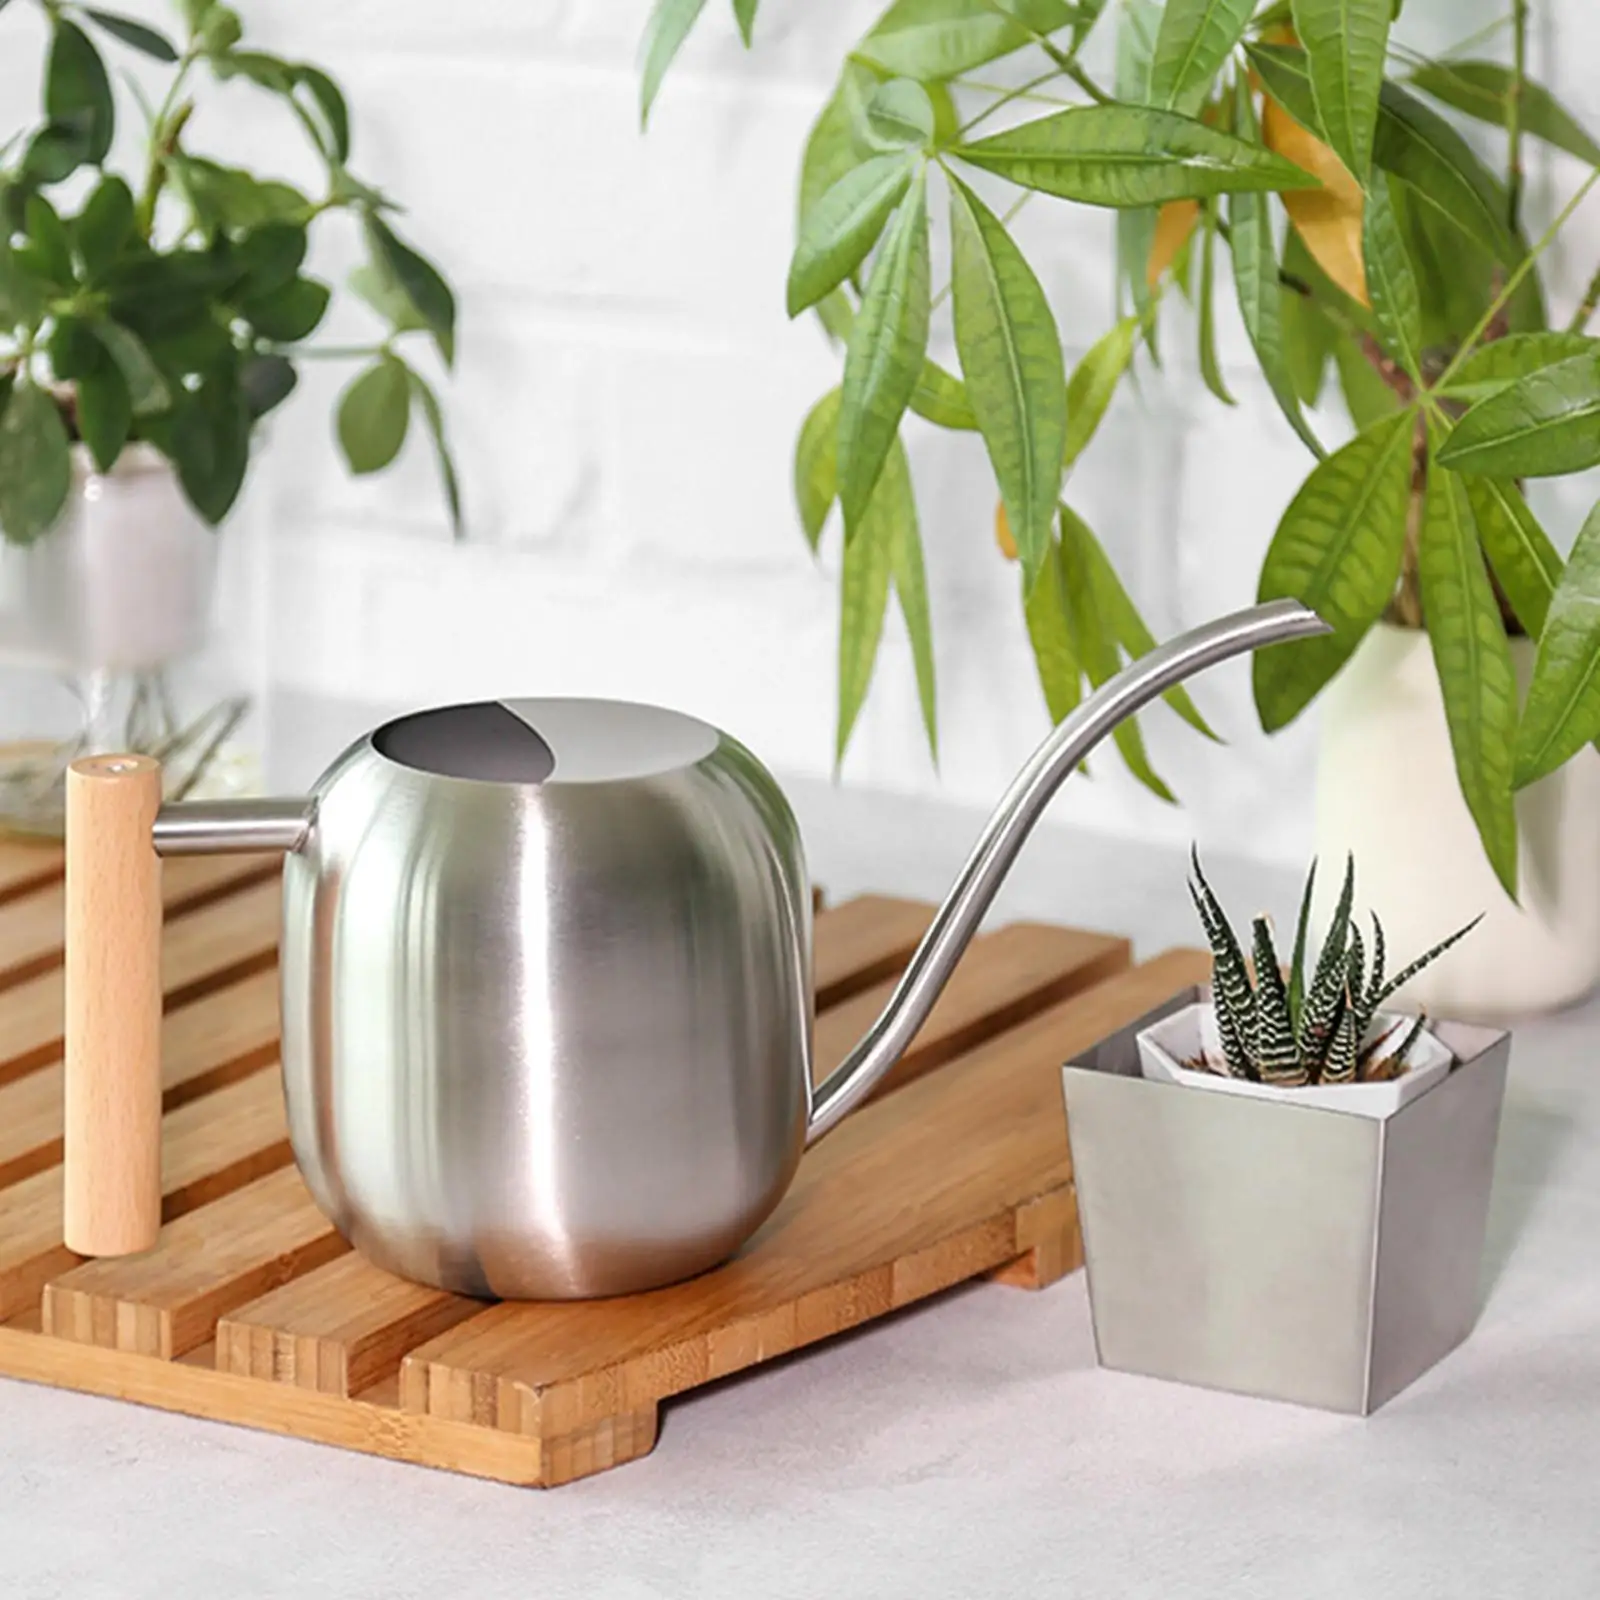 Stainless Steel Watering Can Small Wooden Handle for Outdoor Patio Decor